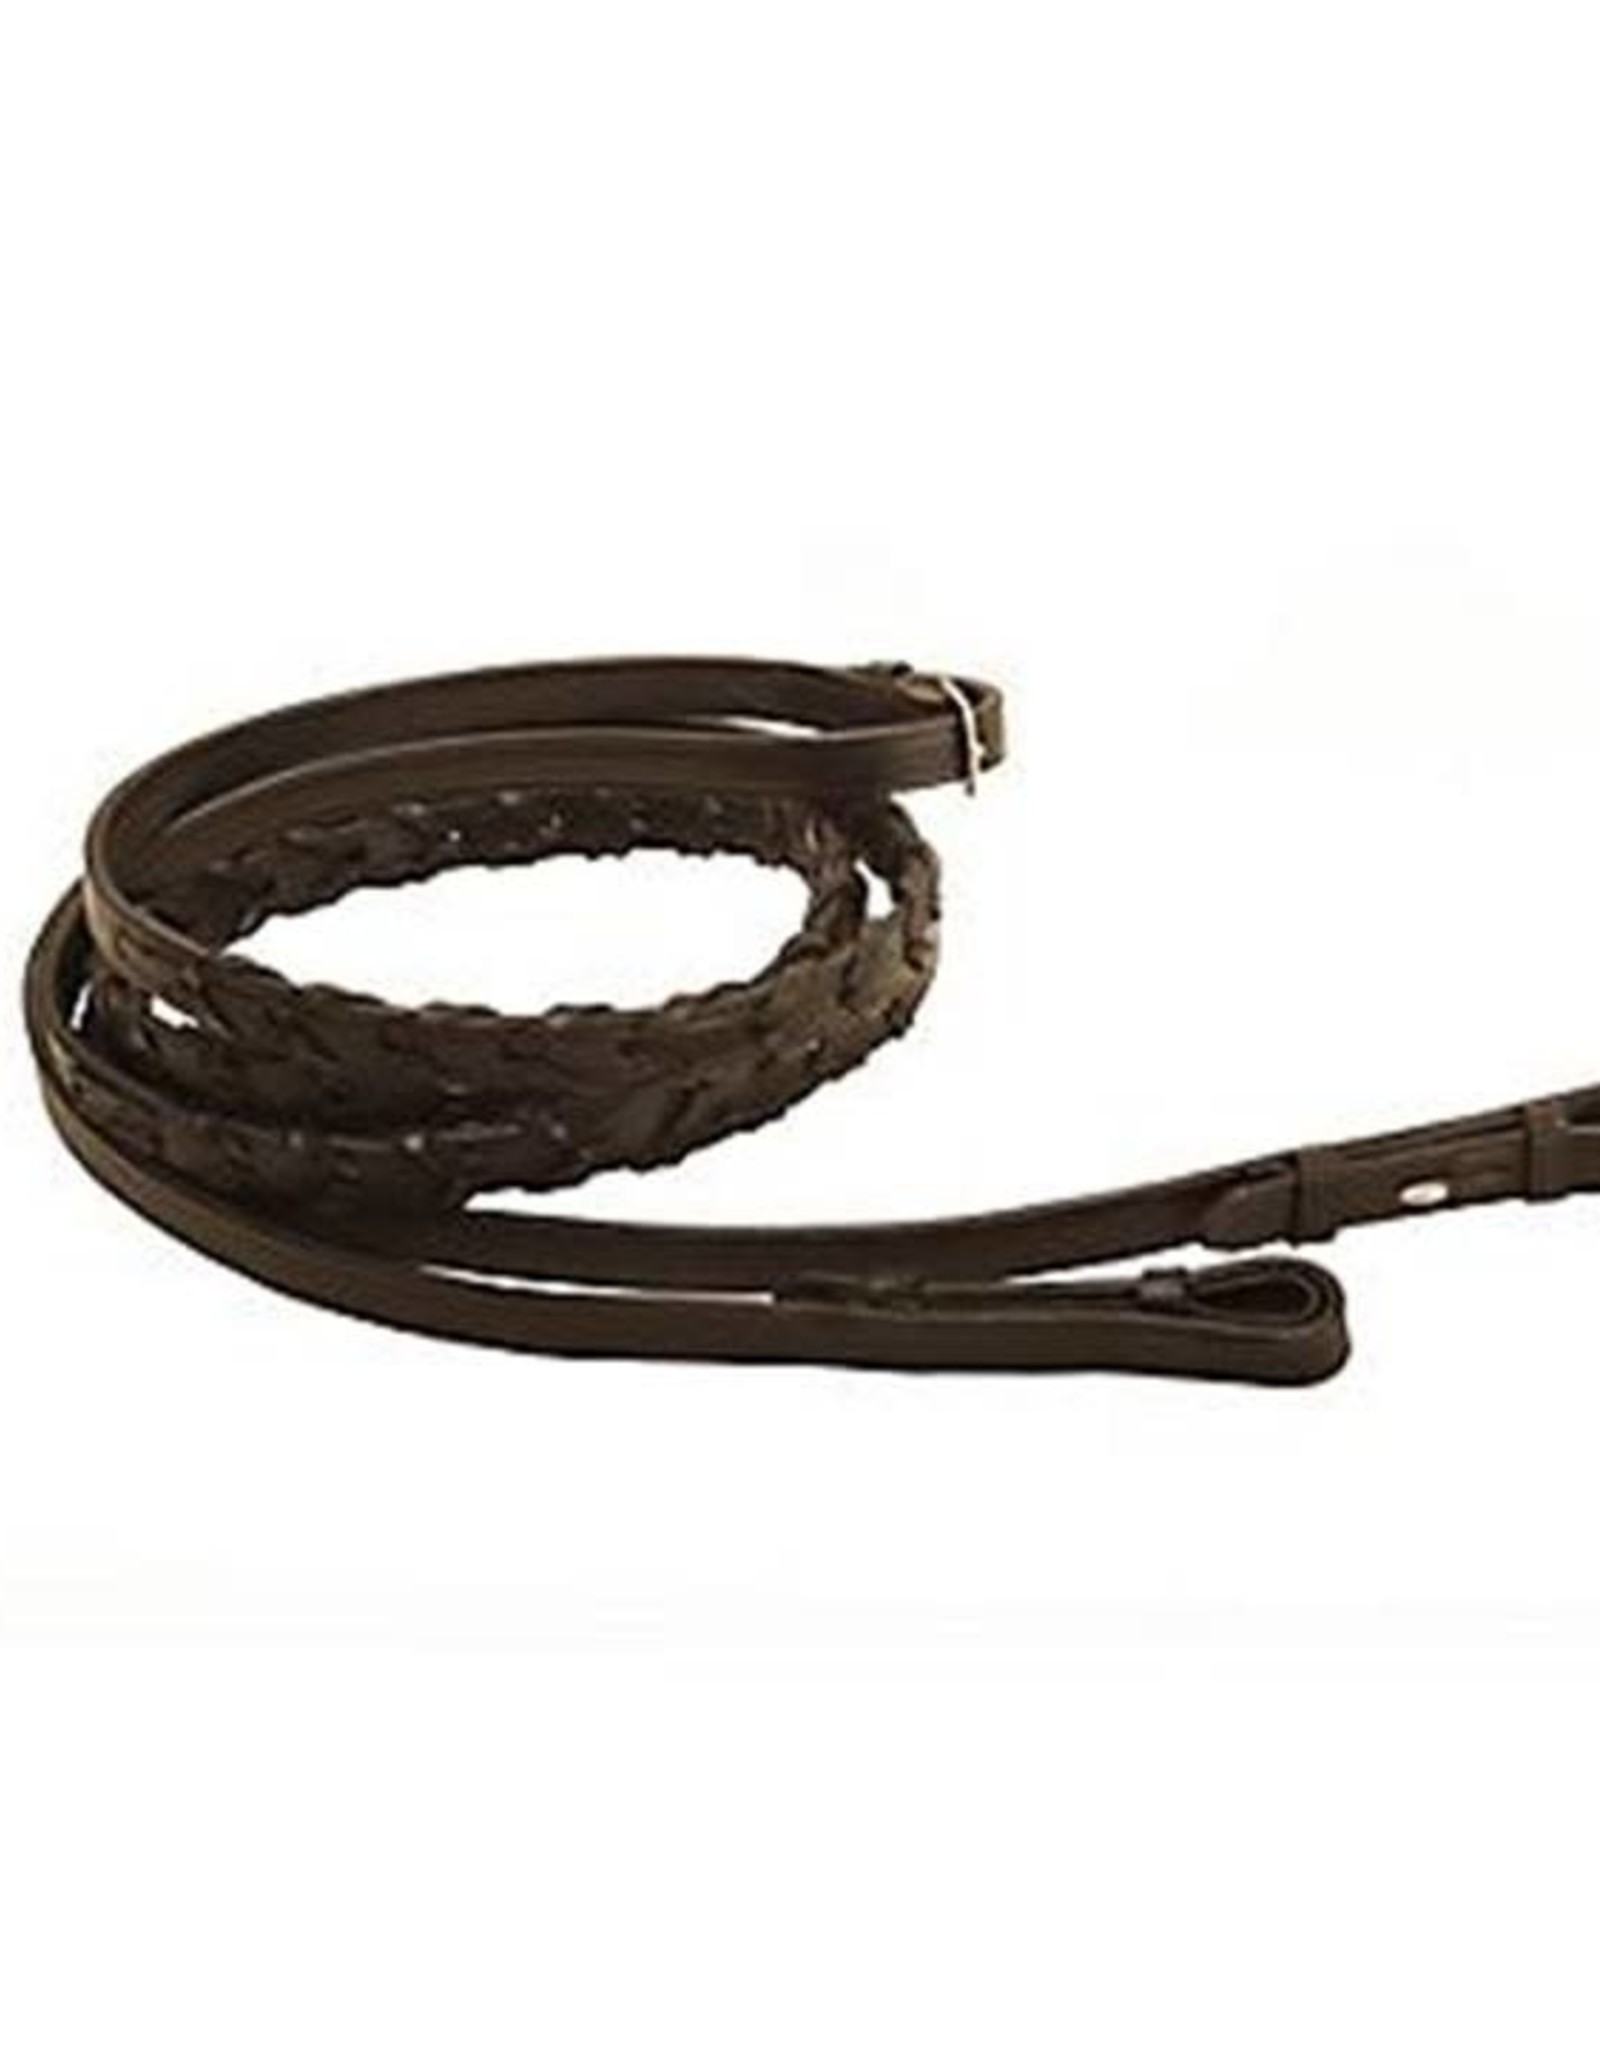 Tory Reins 72" Laced with Hook Stud ends